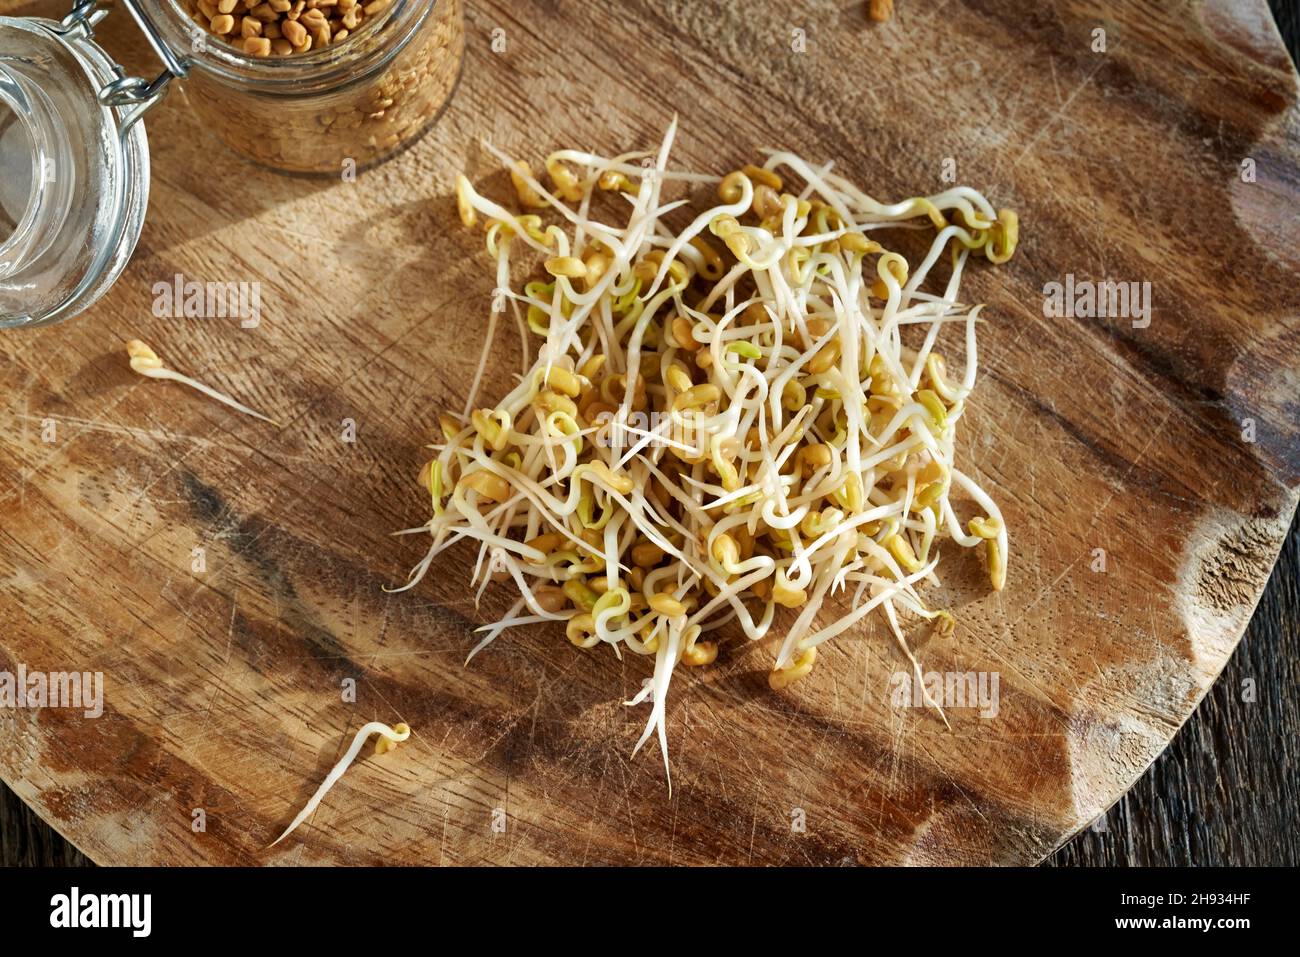 Fresh fenugreek sprouts with dry seeds in the background, top view Stock Photo